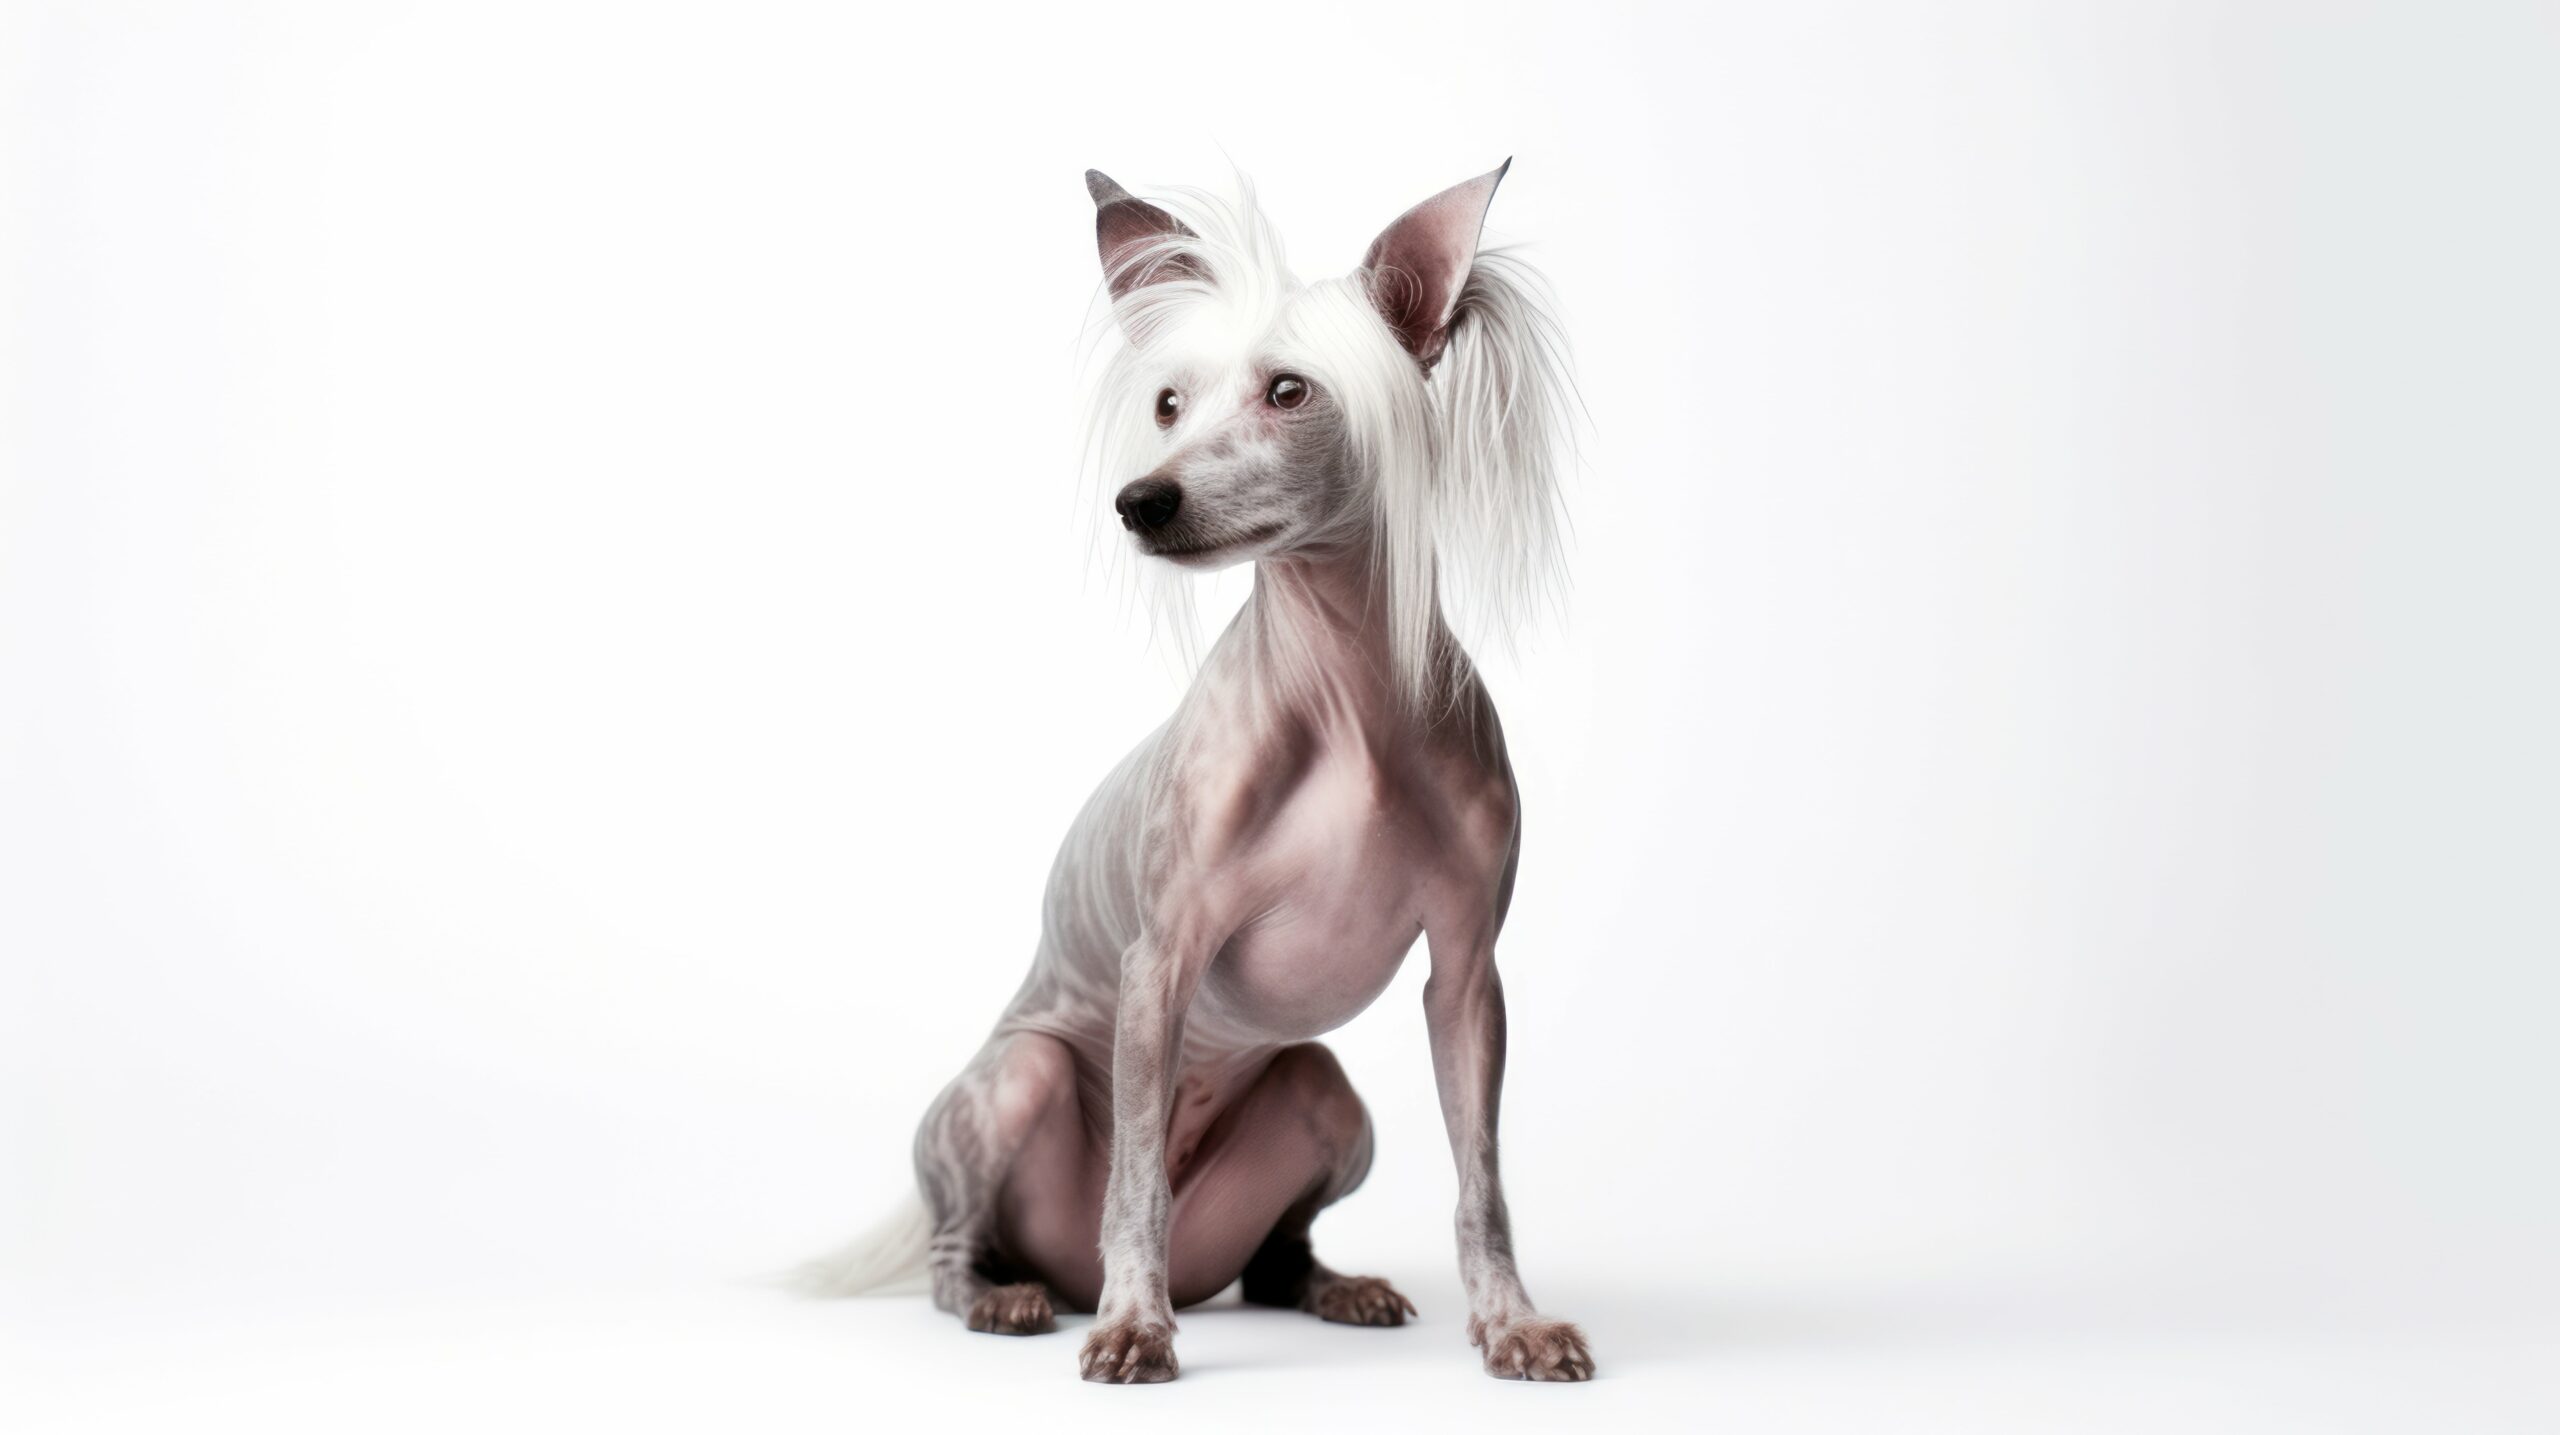 Chinese Crested is from the Small Dog Breeds